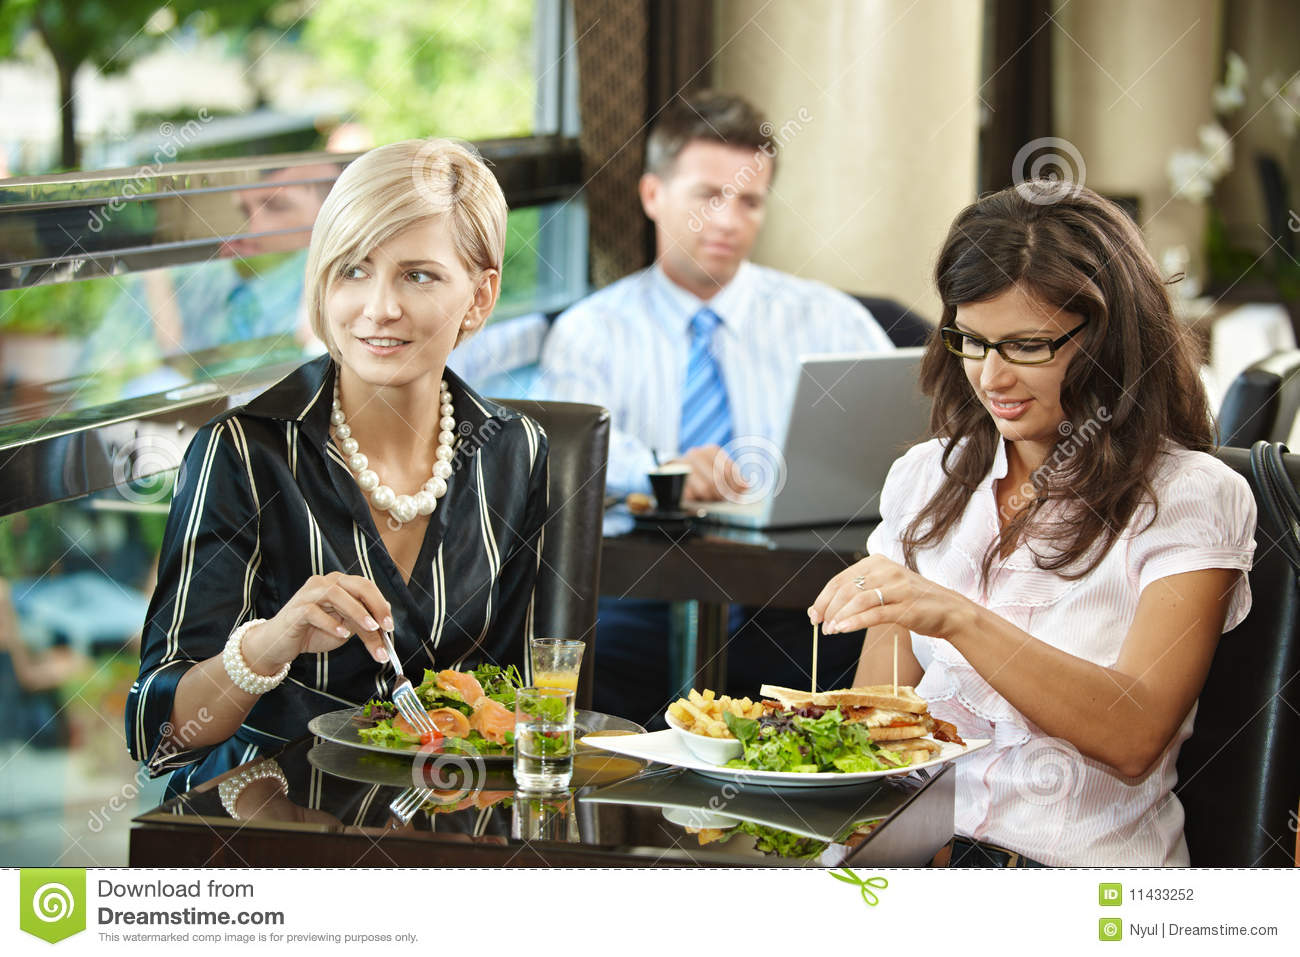 Young Women Sitting At Table Eating Sandwich And Salad In Restaurant    